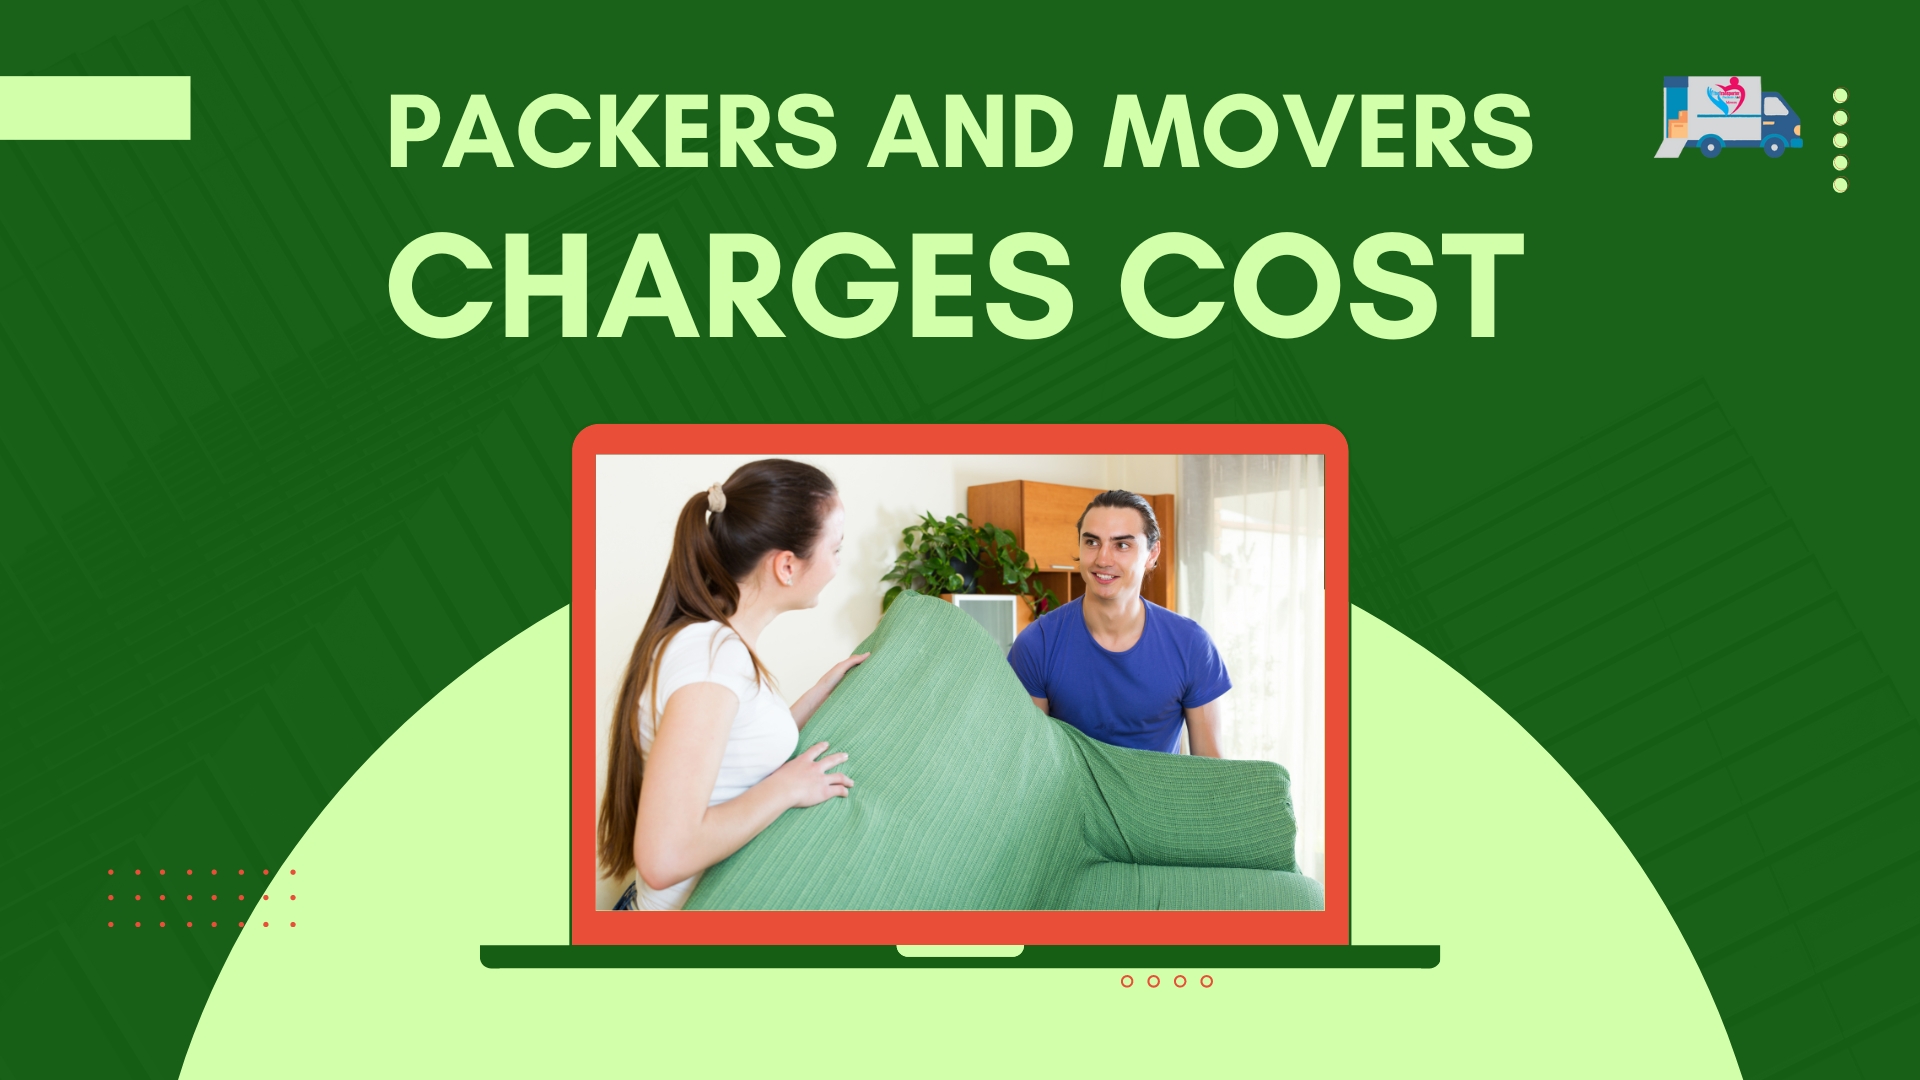 Packers and Movers offers competitive movers and packers Bangalore rates and excellent services